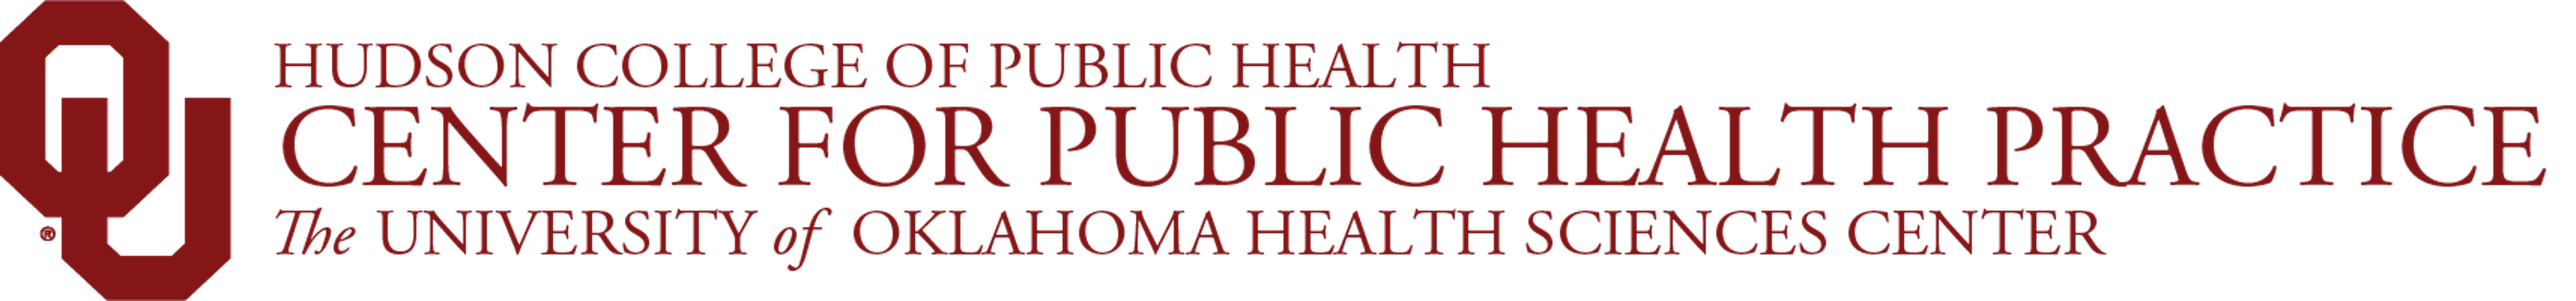 Center for Public Health Practice (CPHP) - Hudson College of Public Health